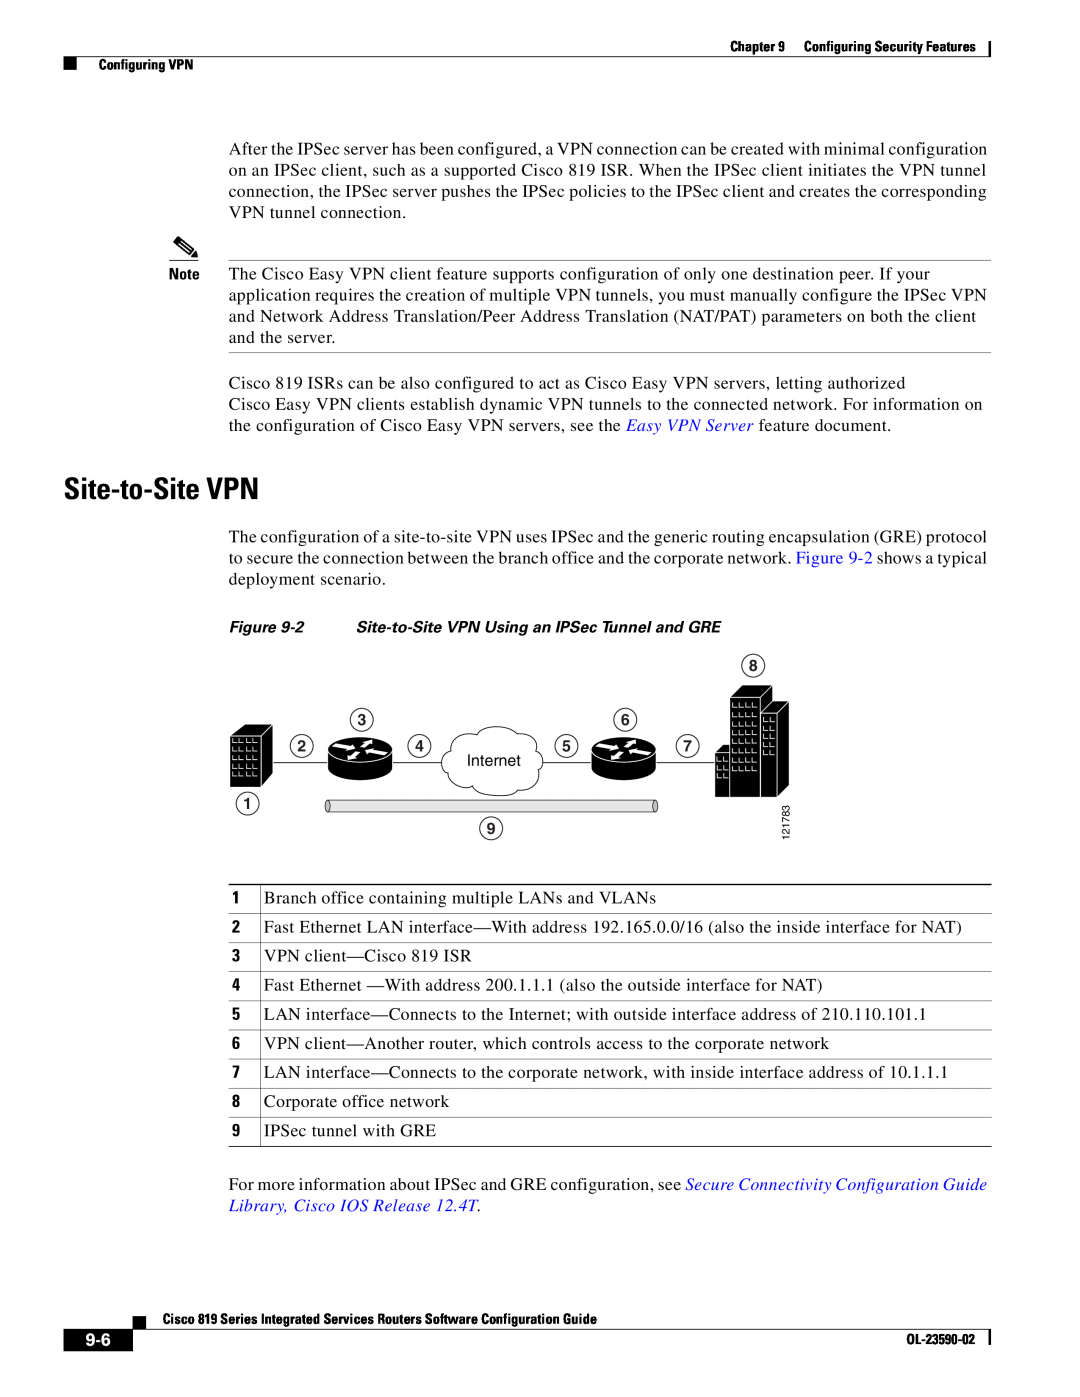 Cisco Systems C819GUK9, C819HG4GVK9 manual Site-to-Site VPN, Library, Cisco IOS Release 12.4T 